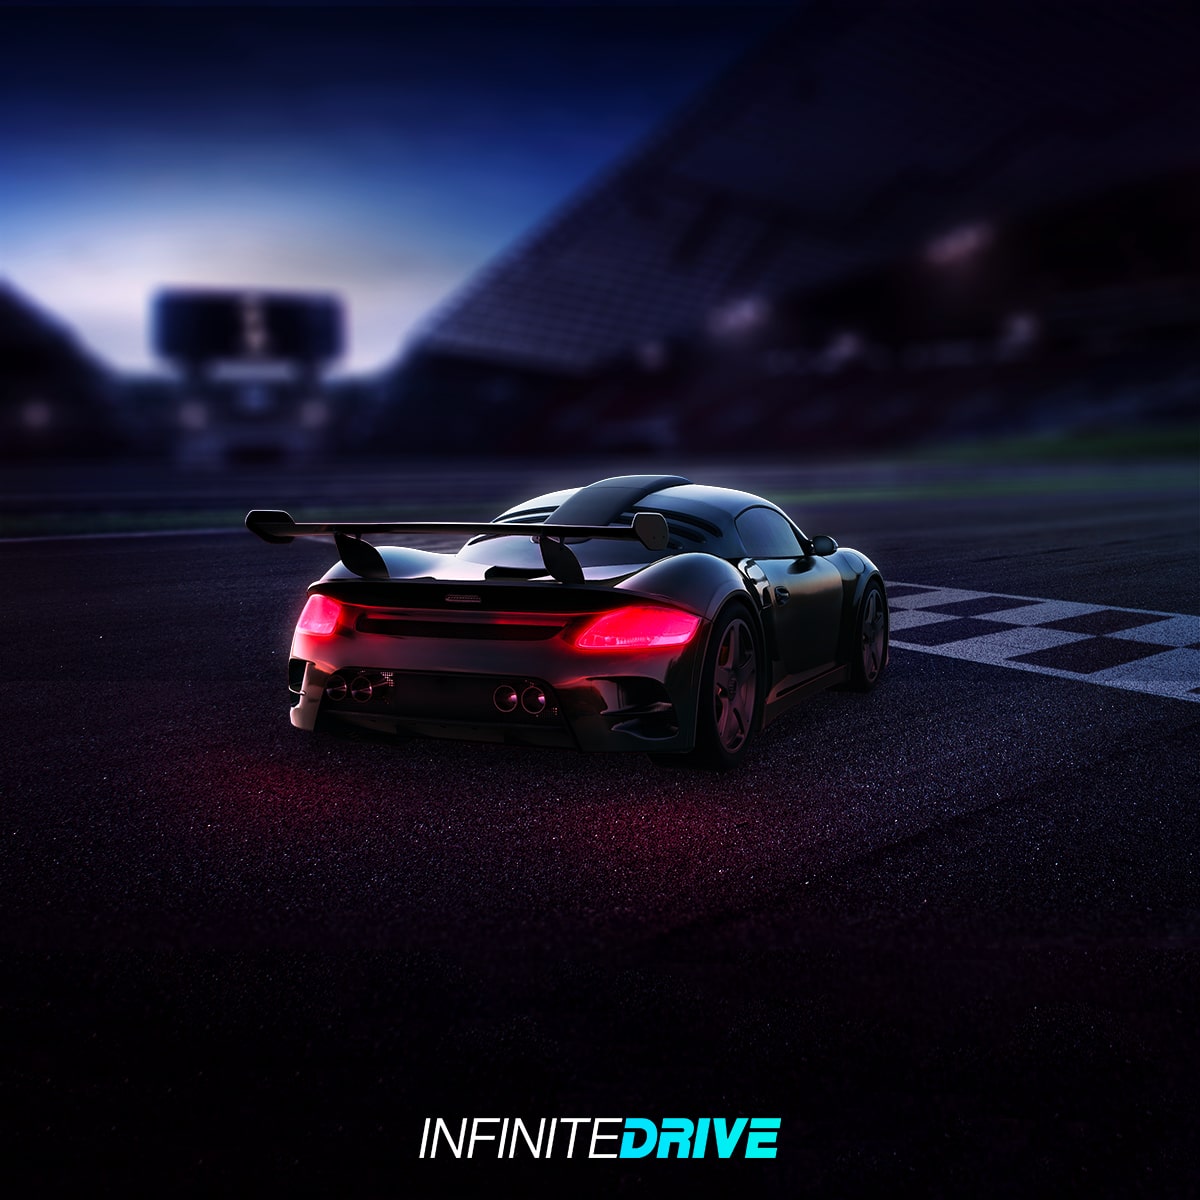 Infinite Drive the first driving metaverse!